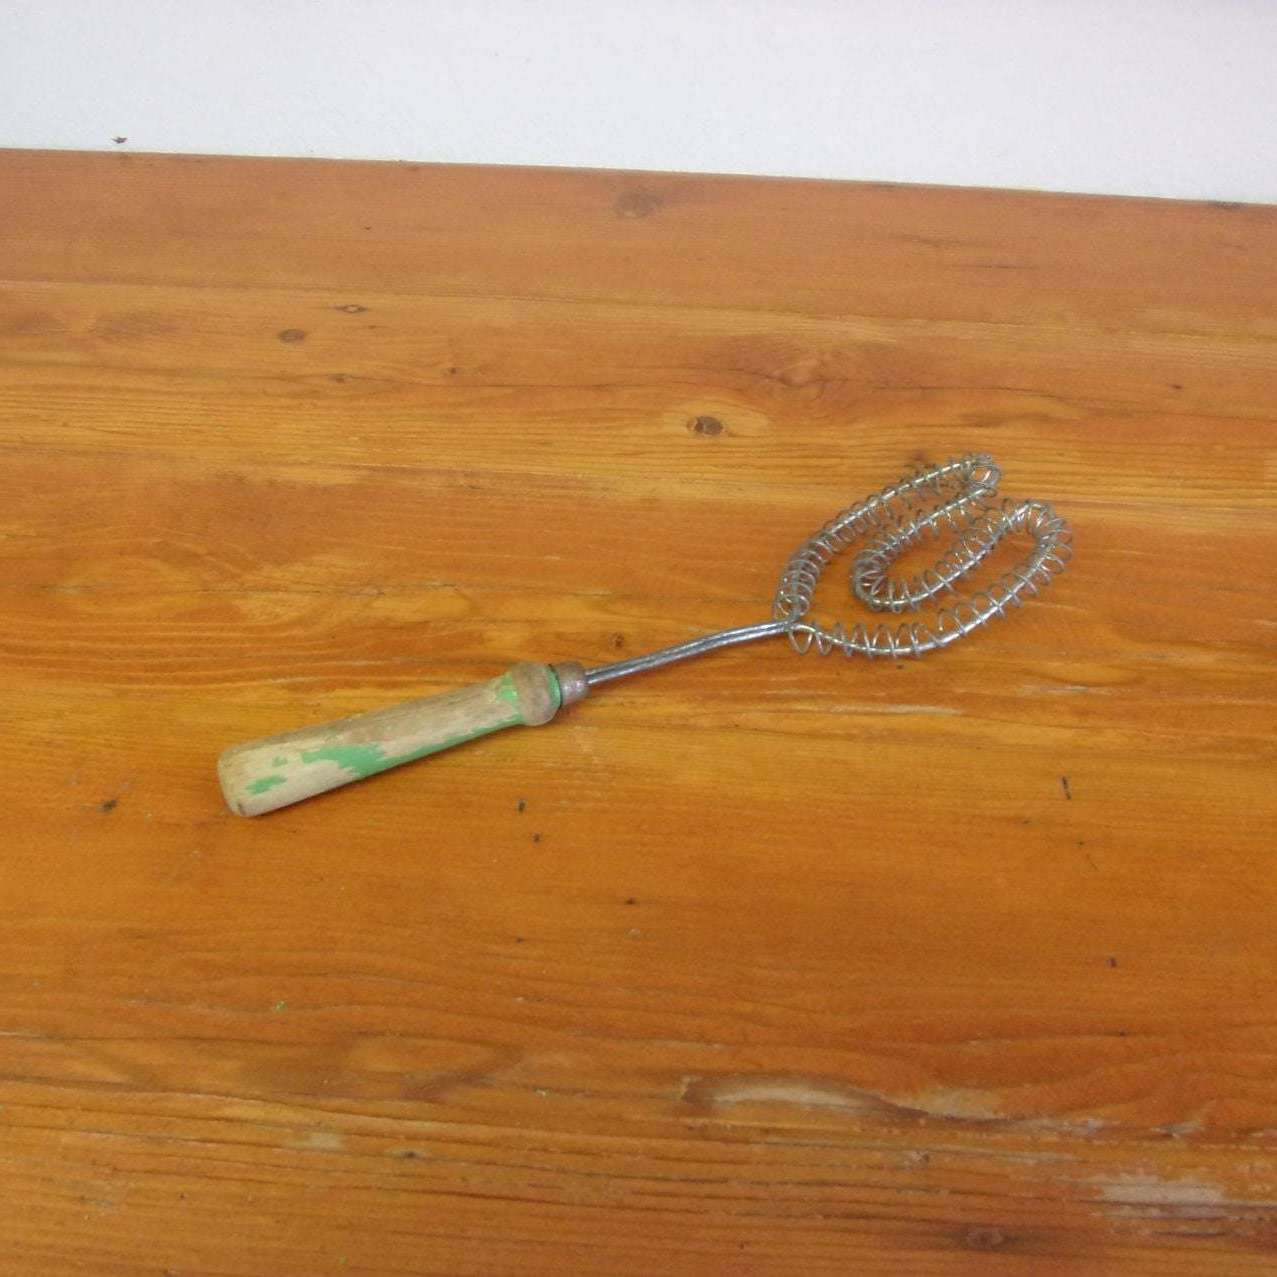 https://maandpasattic.com/cdn/shop/files/antique-wire-whisk-egg-beater-u-shape-with-wood-handle-kitchen-tools-gadgets-ma-and-pas-attic-32293035_1024x1024@2x.jpg?v=1683070585